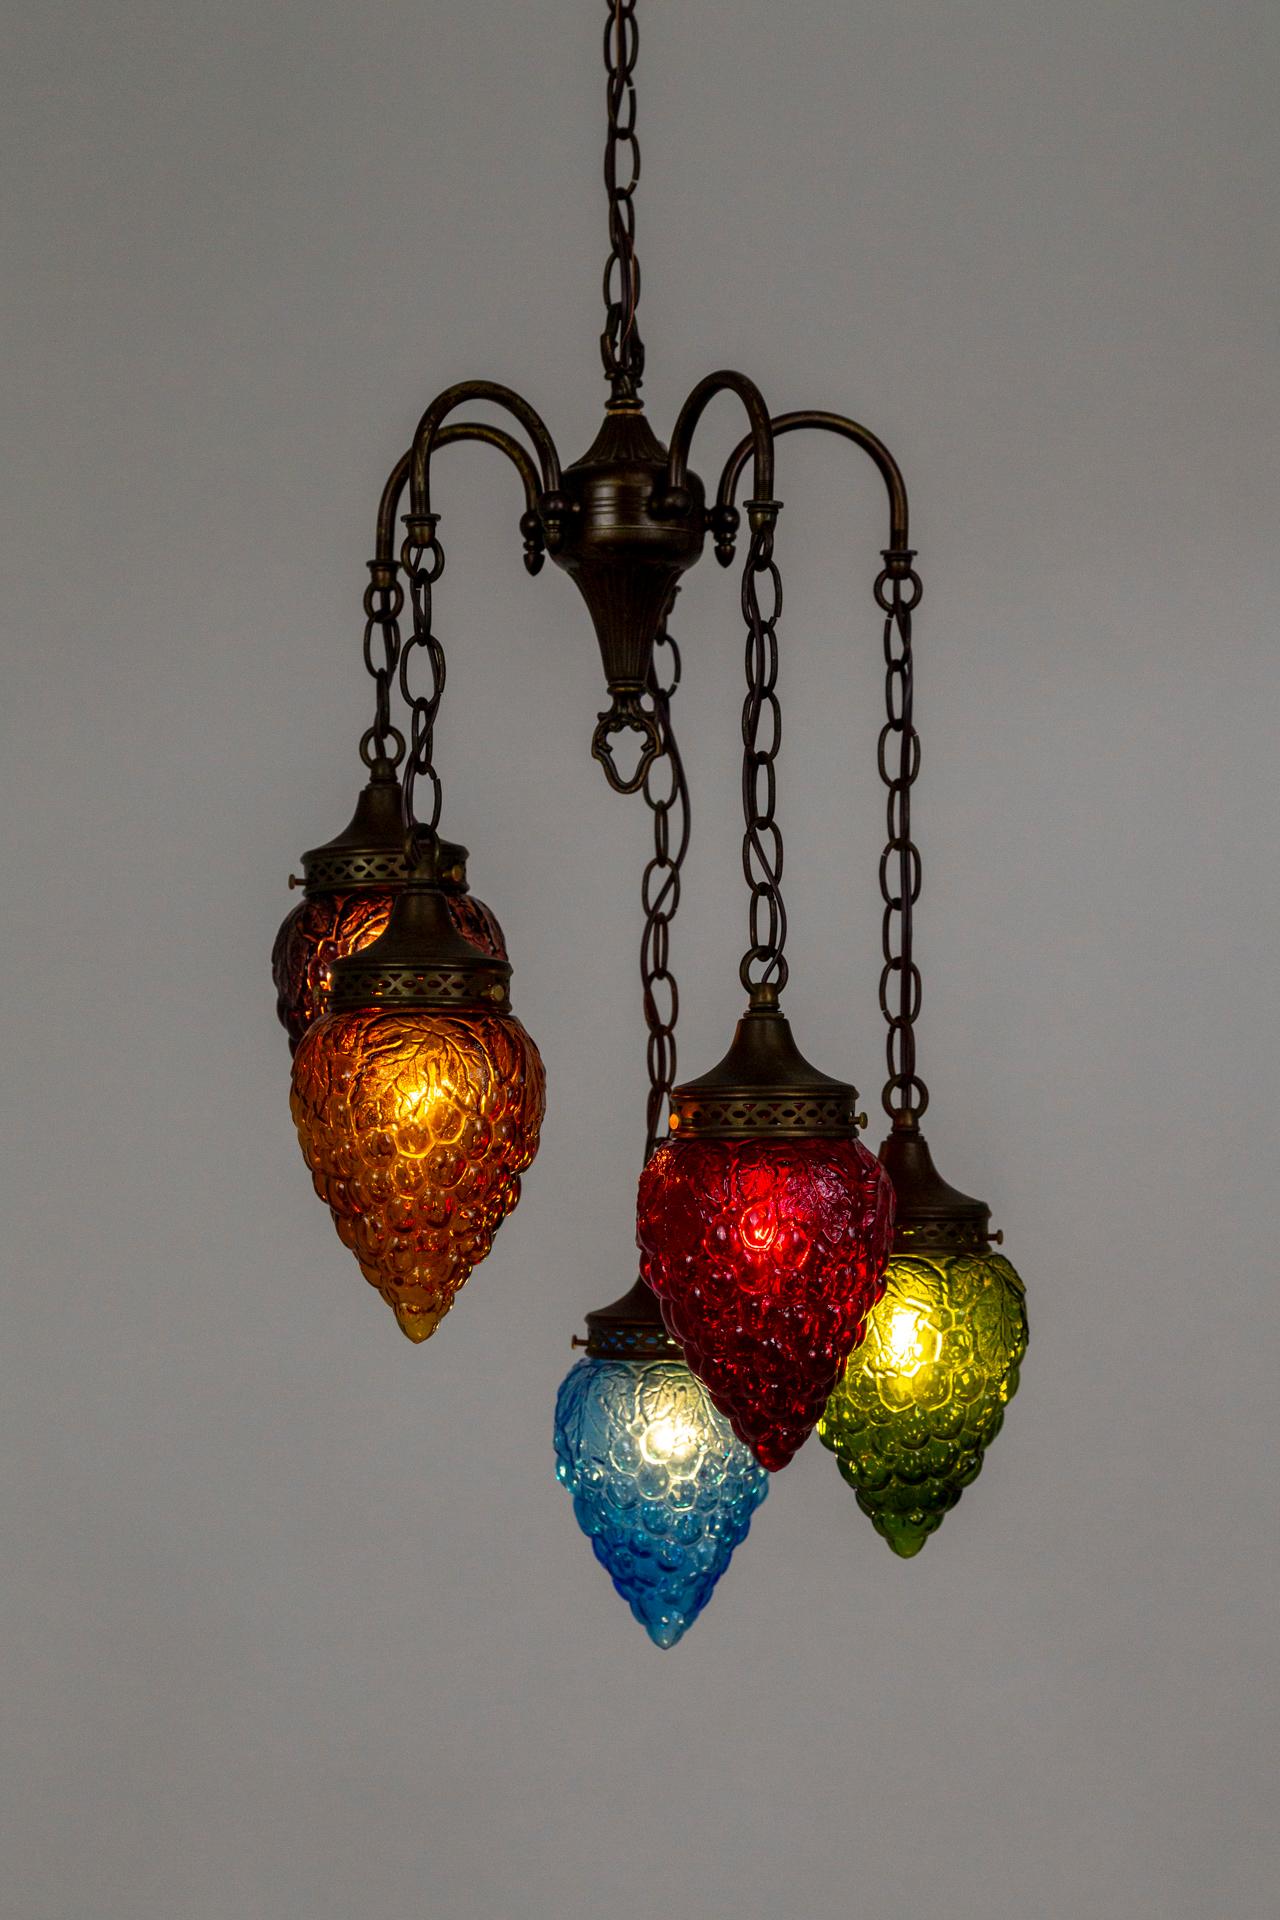 An early 20th-century light fixture comprised of 5 multicolored, pressed glass grape clusters with varied-length chains dangling from a sprouted center. The brass structure has a pleasing antique tone with cut details on the shade holders. The